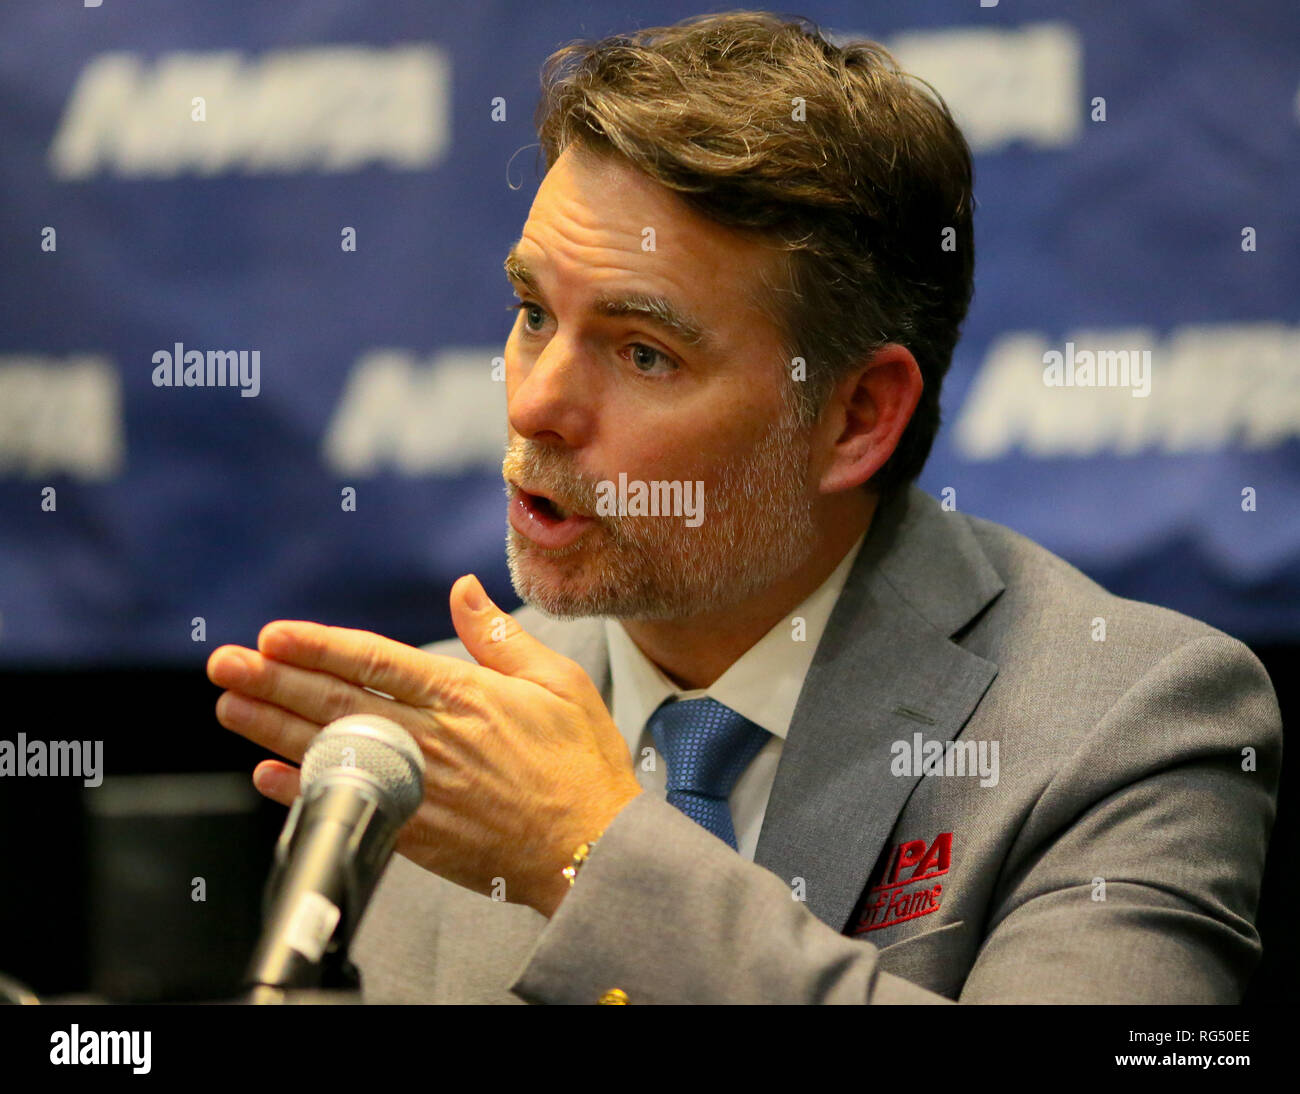 Charlotte, North Carolina, USA. 27th Jan, 2019. Retired NASCAR Driver JEFF GORDON speaking at his 2019 National Motorsports Press Association (NMPA) Hall of Fame Induction ceremony press conference on January 27, 2019 in Charlotte, N.C. Credit: Ed Clemente/ZUMA Wire/Alamy Live News Stock Photo